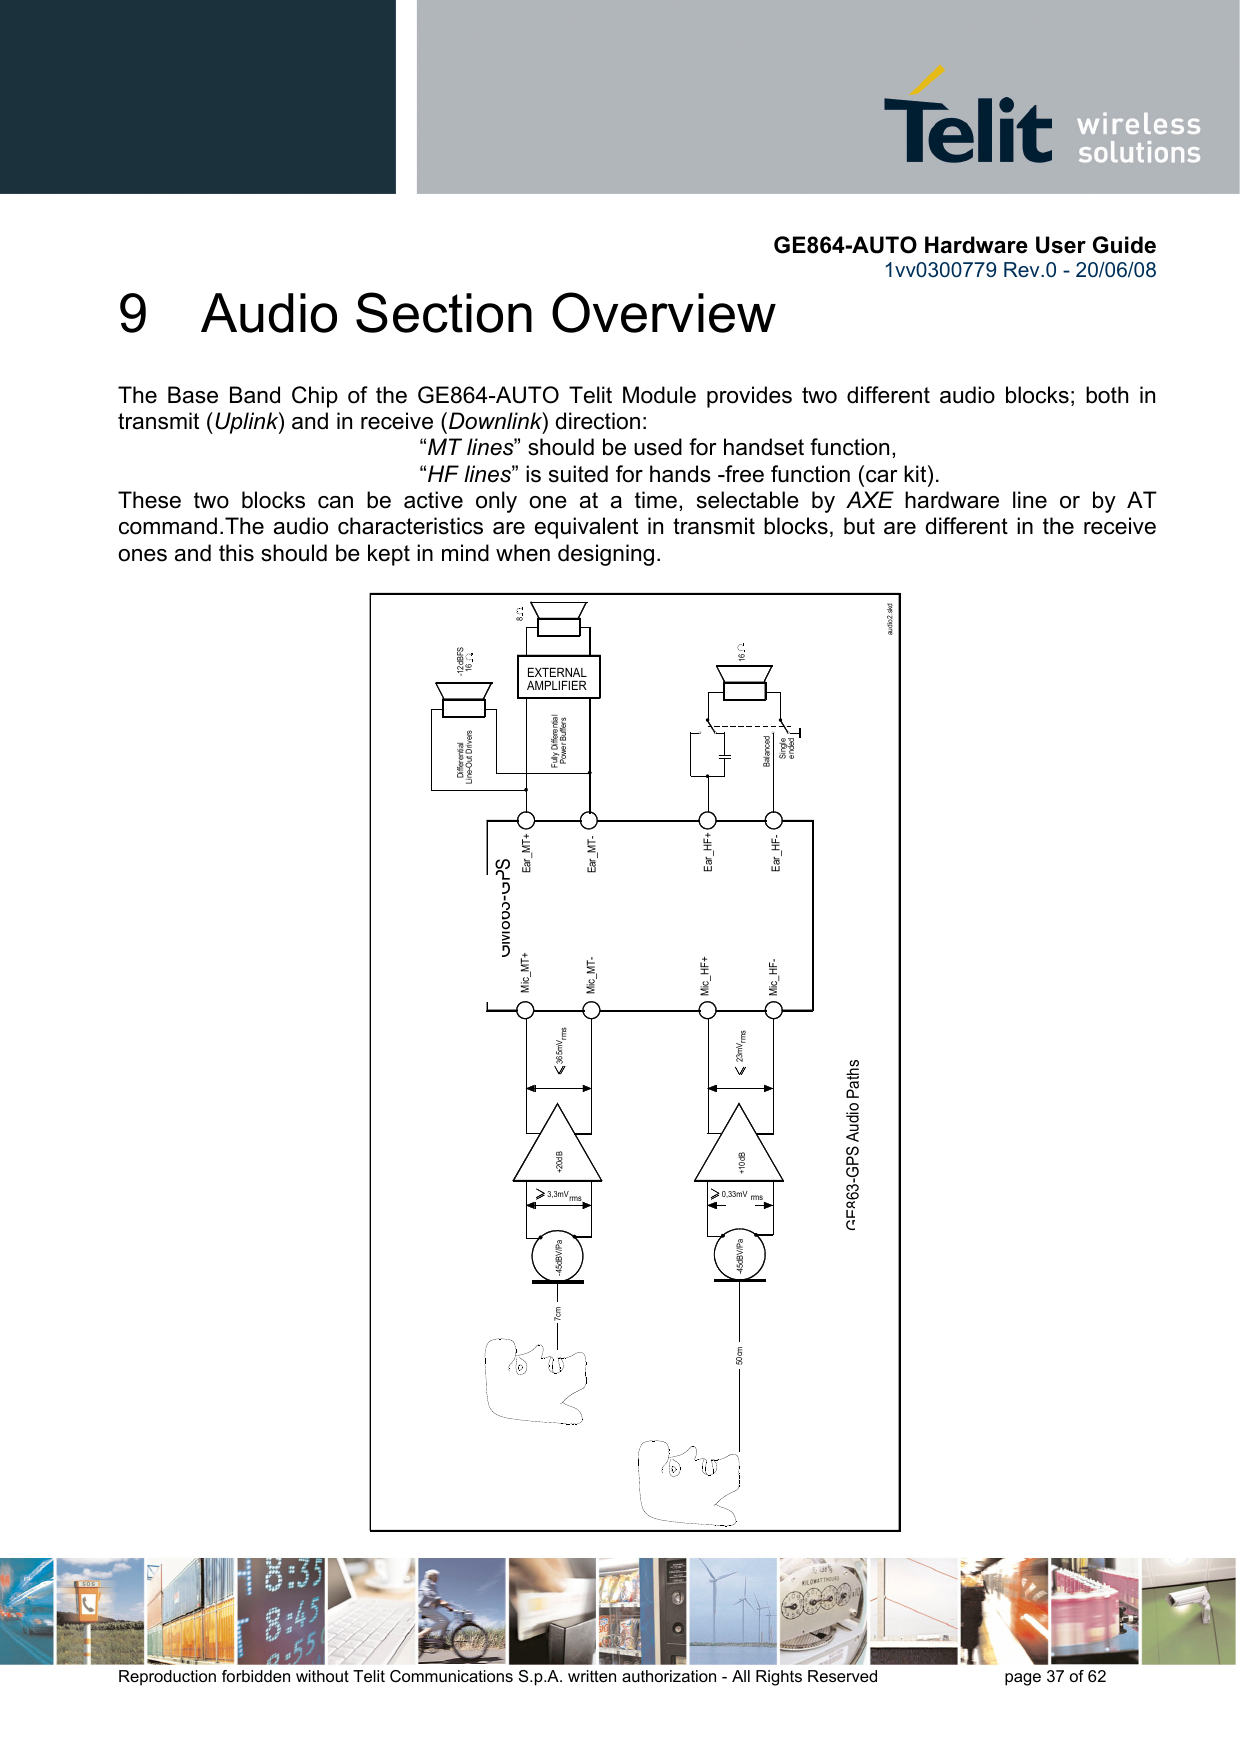       GE864-AUTO Hardware User Guide 1vv0300779 Rev.0 - 20/06/08      Reproduction forbidden without Telit Communications S.p.A. written authorization - All Rights Reserved    page 37 of 62  9  Audio Section Overview The Base Band Chip of the GE864-AUTO Telit Module provides two different audio blocks; both in transmit (Uplink) and in receive (Downlink) direction:  “MT lines” should be used for handset function,   “HF lines” is suited for hands -free function (car kit). These two blocks can be active only one at a time, selectable by AXE hardware line or by AT command.The audio characteristics are equivalent in transmit blocks, but are different in the receive ones and this should be kept in mind when designing.  GE863-GPS Audio Paths   Differential Line-Out Drivers Fully Differential  Power Buffers EXTERNALAMPLIFIER-12dBFS  16816+10dB-45dBV/PaMic_HF-Ear_HF-BalancedSingle endedMic_HF+Ear_HF+50cm23mVrms0,33mV rmsaudio2.skdGM863-GPS+20dB7cm-45dBV/Pa3,3mVrms365mVrmsMic_MT+Ear_MT+Mic_MT-Ear_MT-   